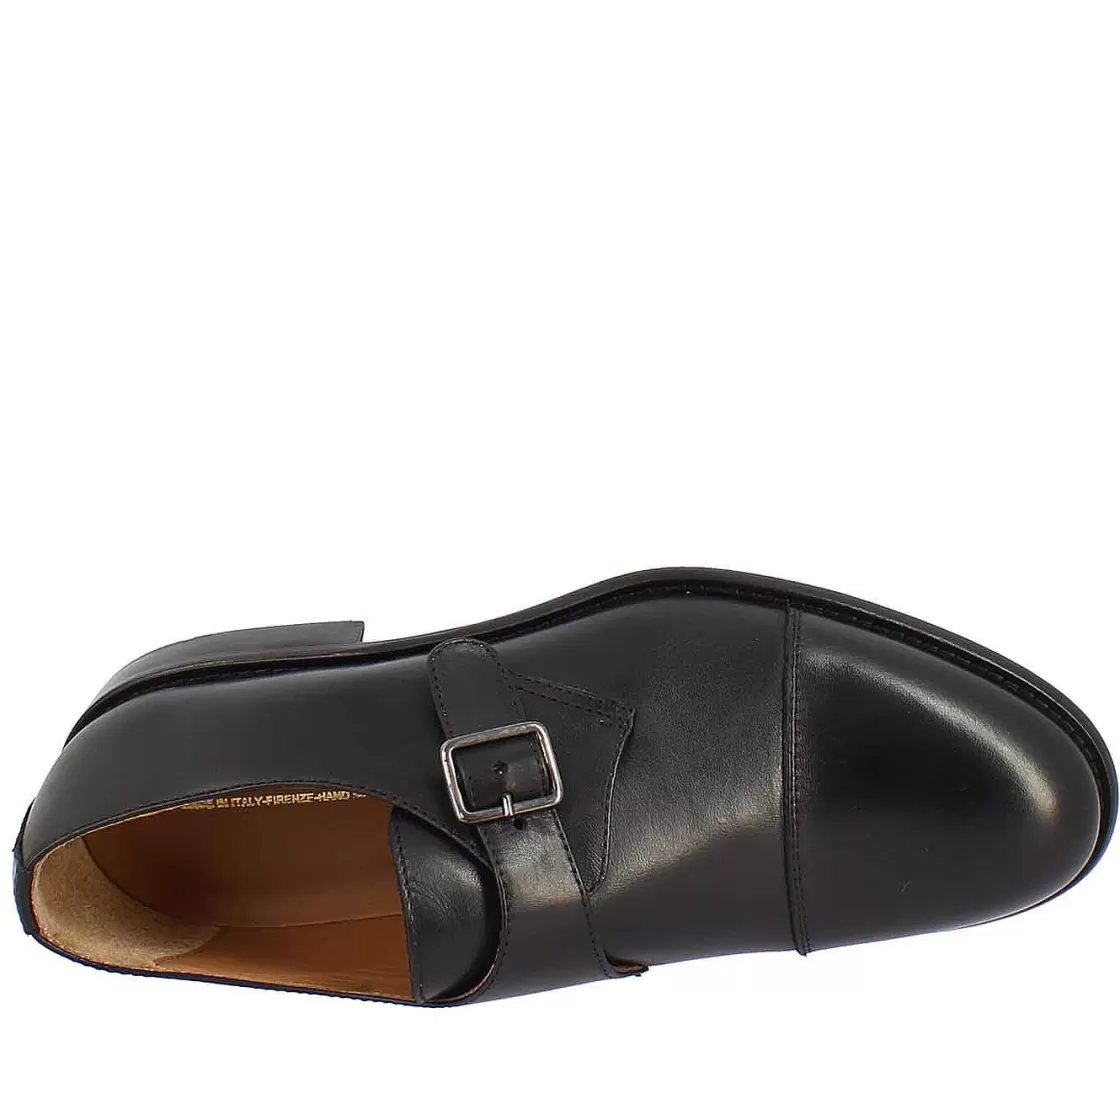 Leonardo Elegant Shoe In Black Calfskin With Leather Lining And Sole Cheap